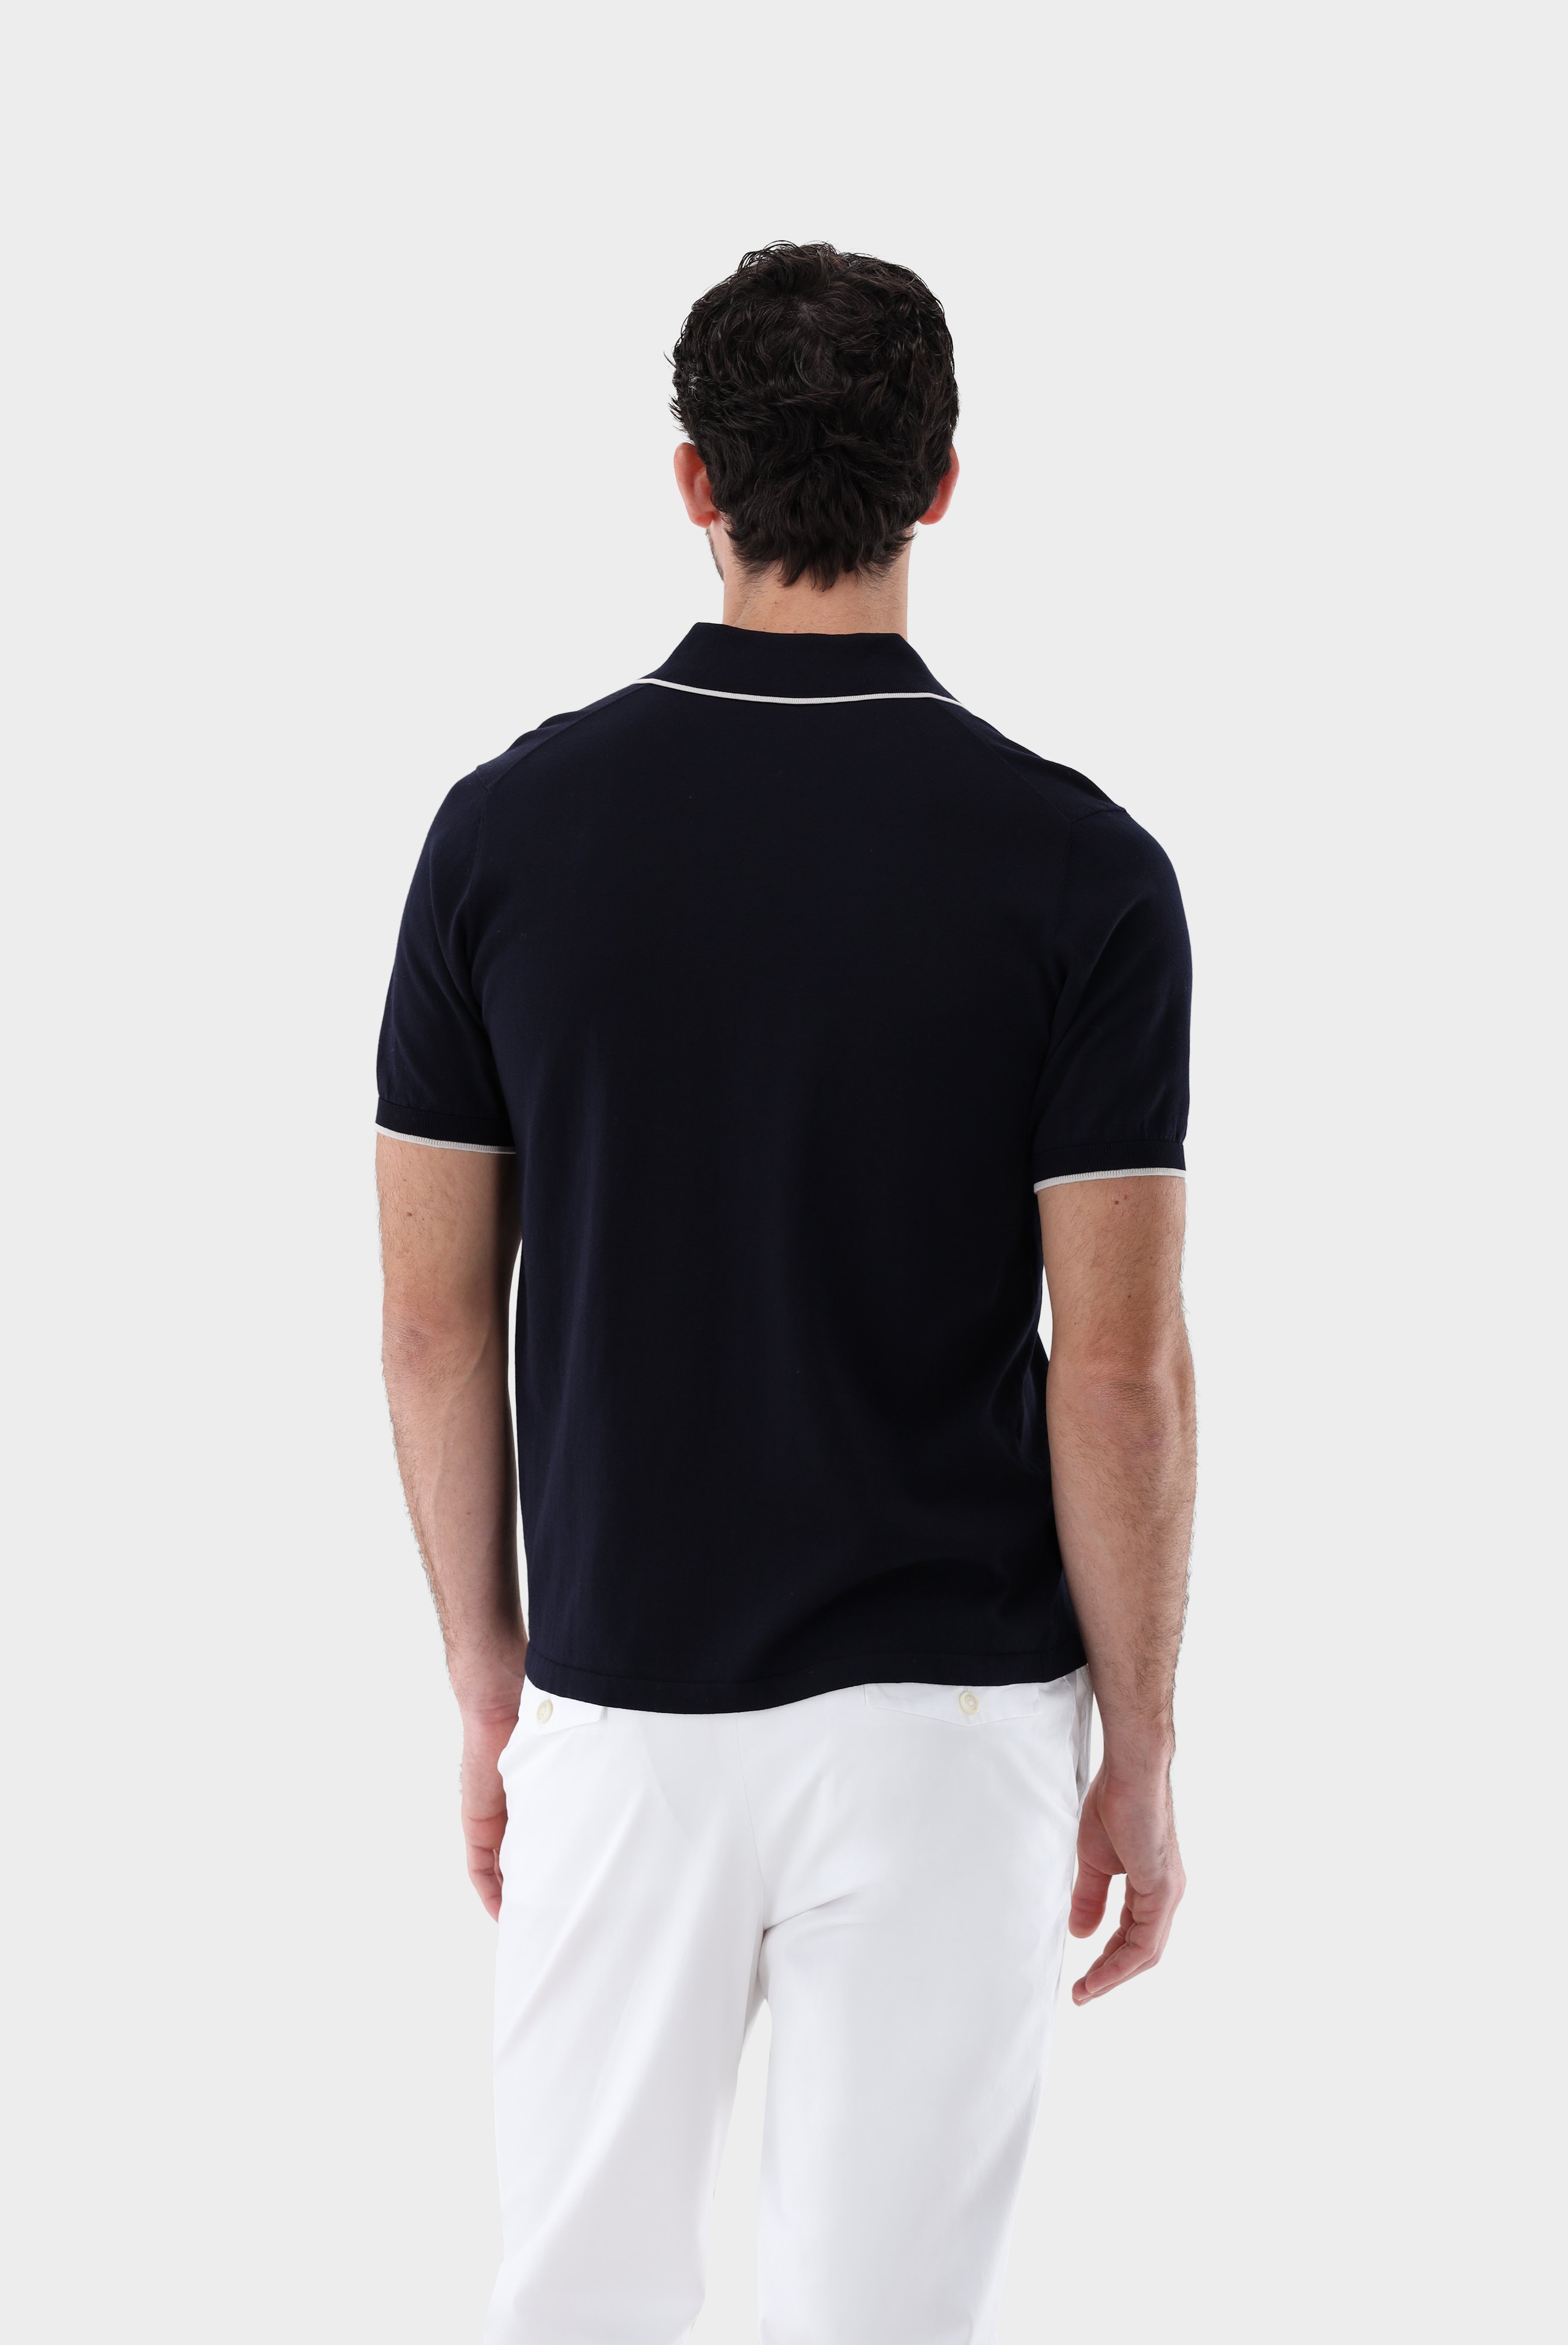 Poloshirts+Zip Knit-Polo in Air Cotton+82.8647.S7.S00174.795.S